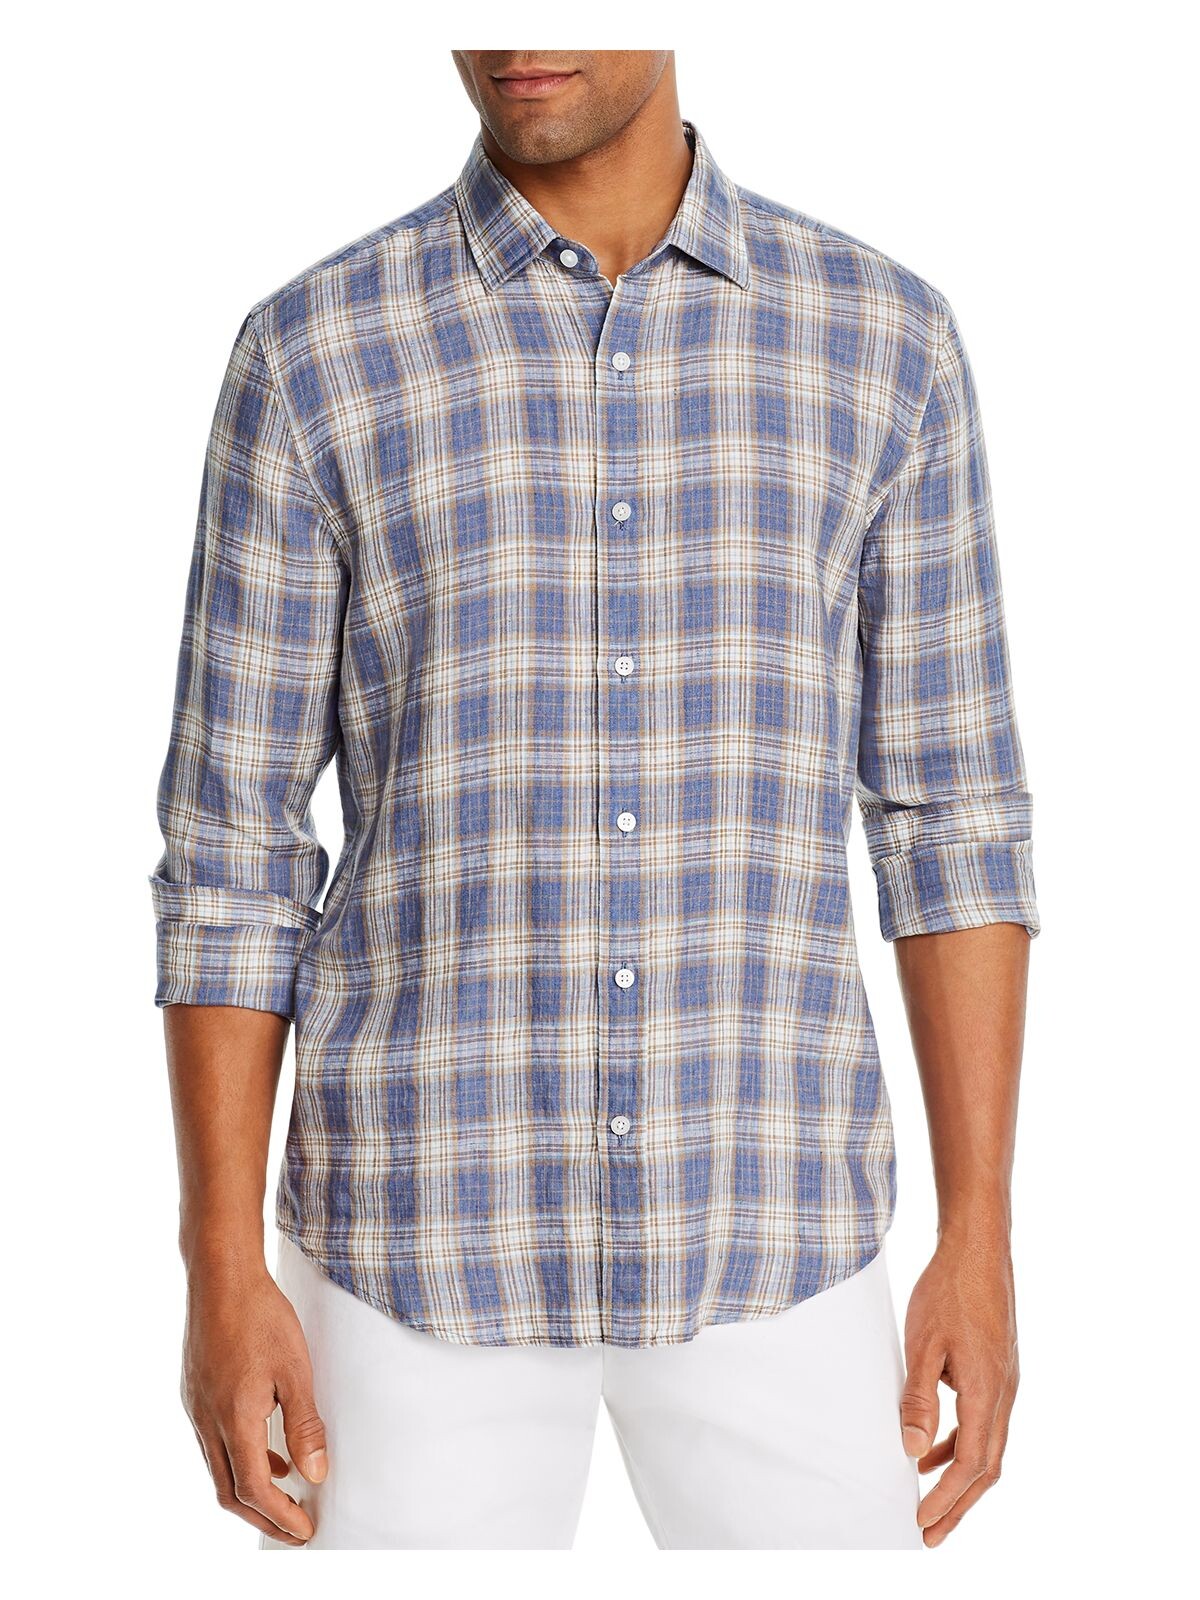 The Mens store Mens Blue Plaid Long Sleeve Classic Fit Button Down Casual Shirt L